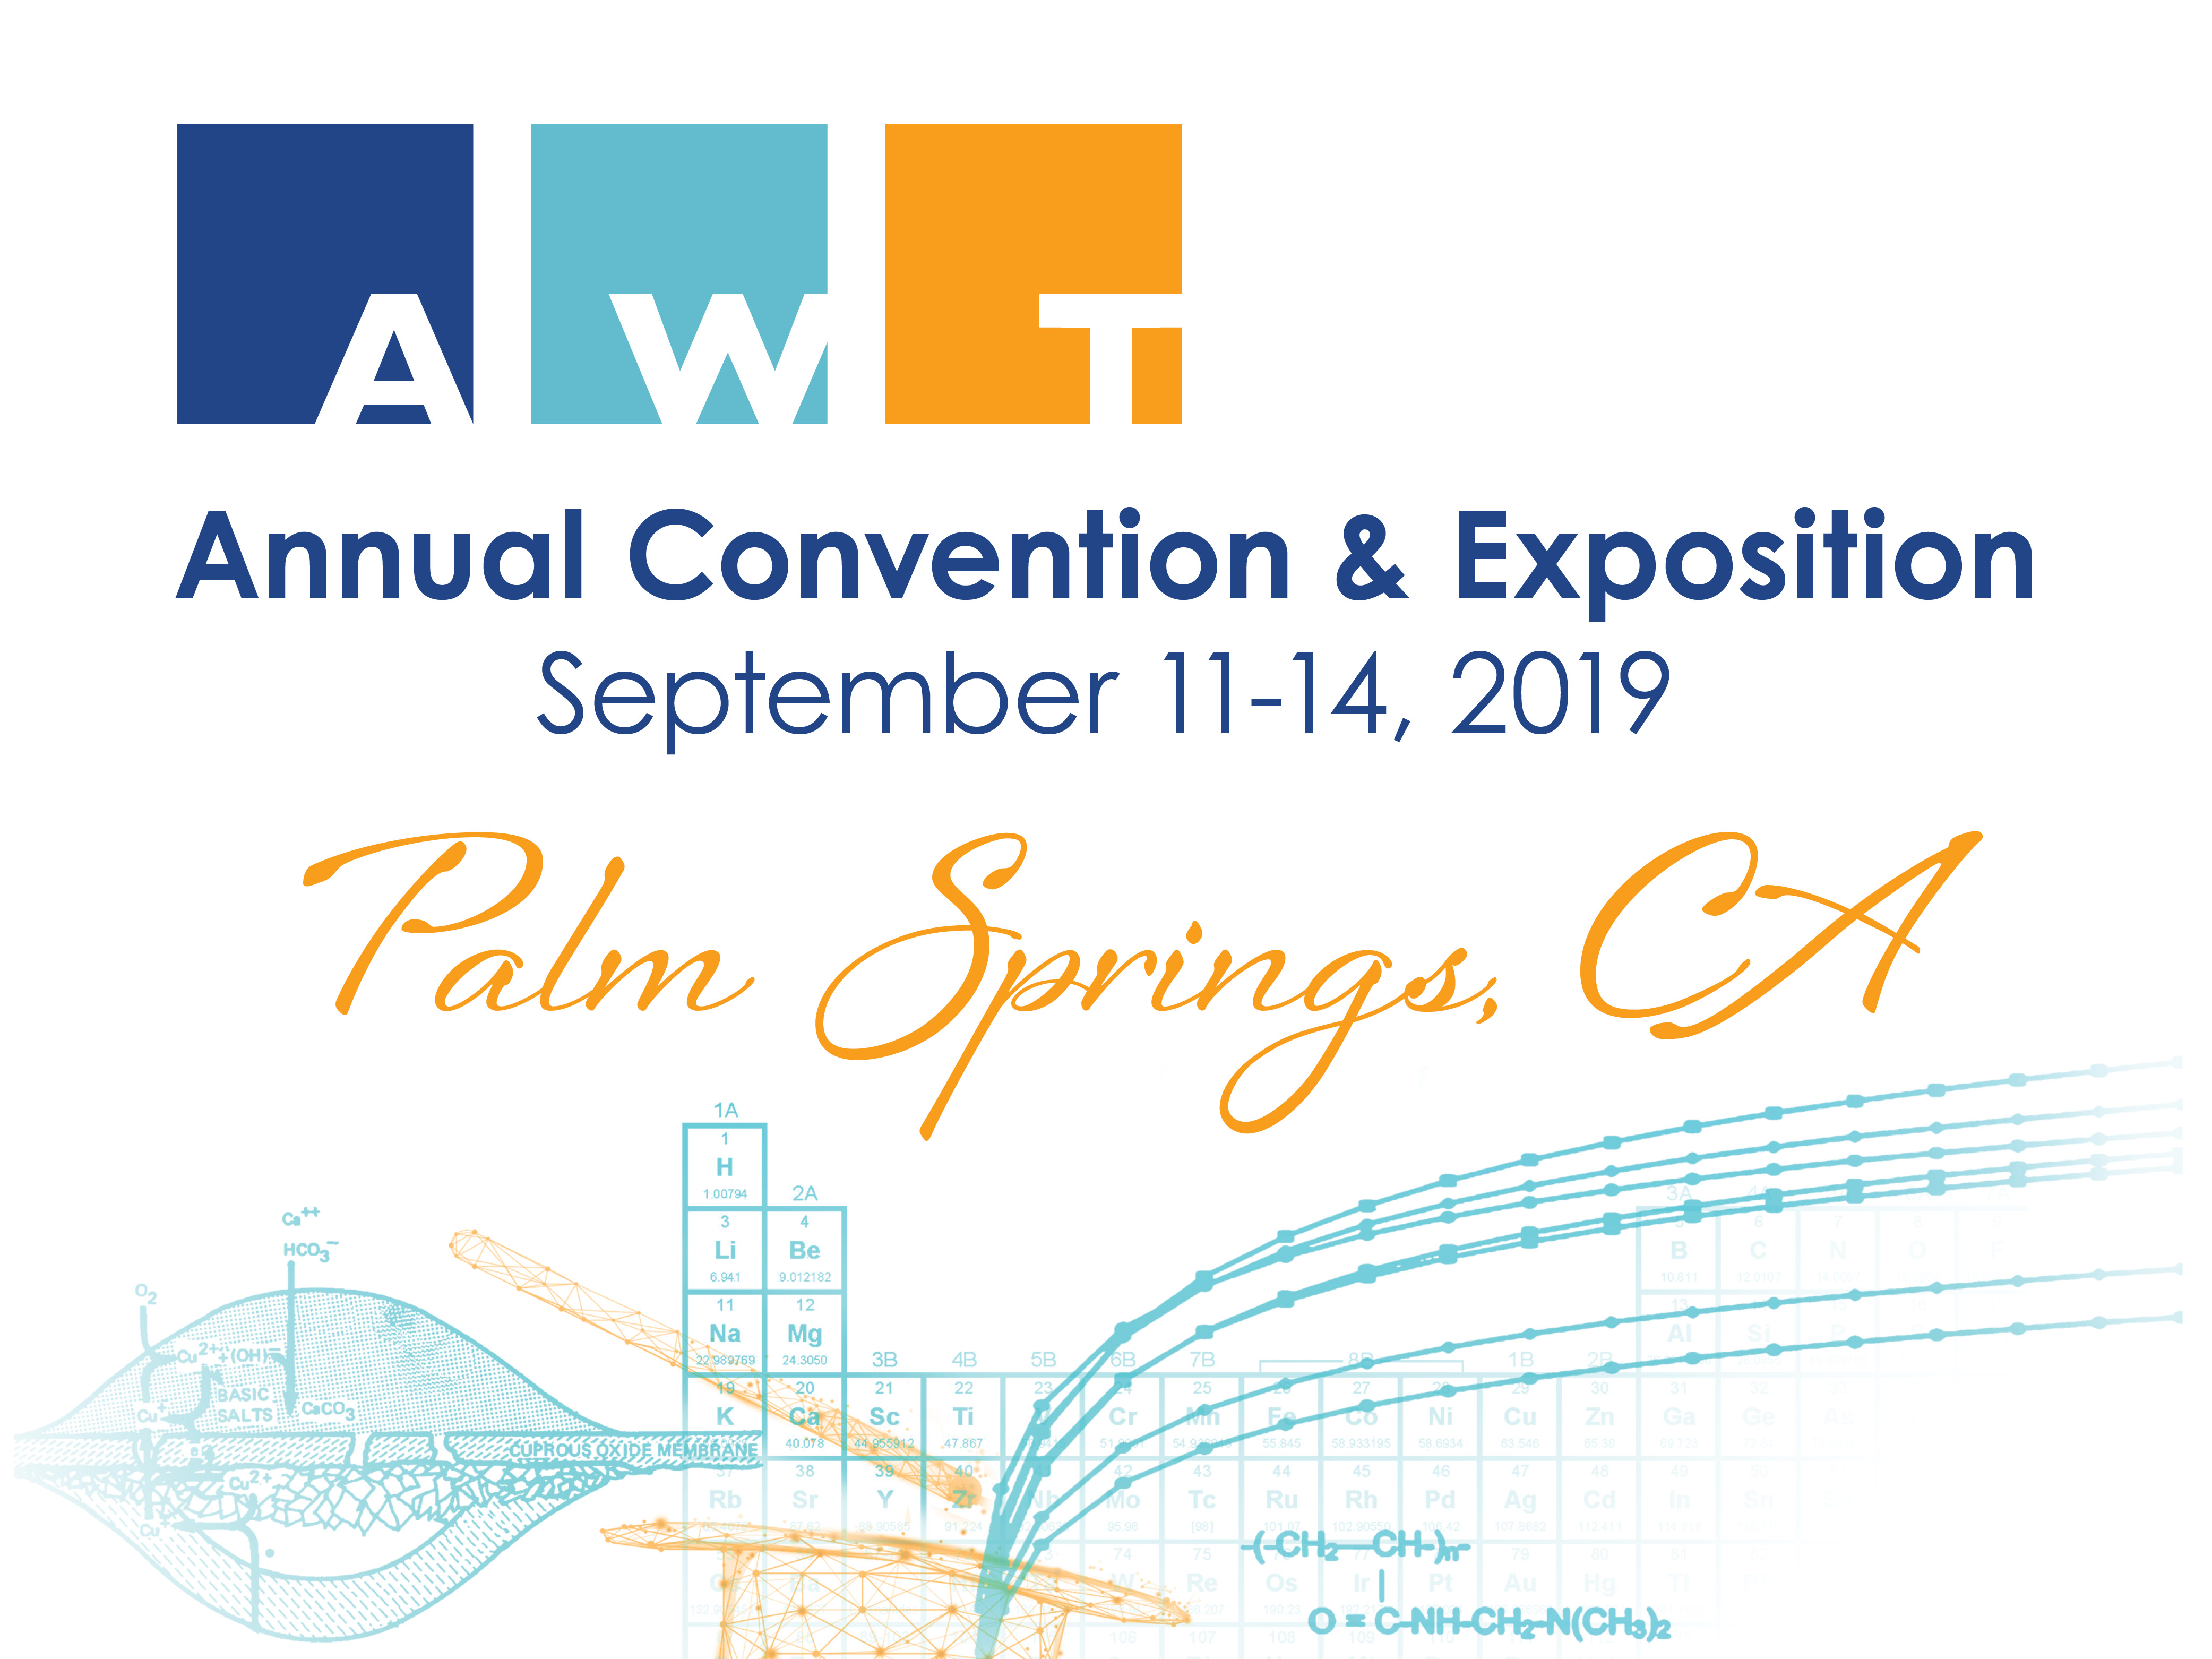 Association of Water Technologies' Annual Convention and Exposition